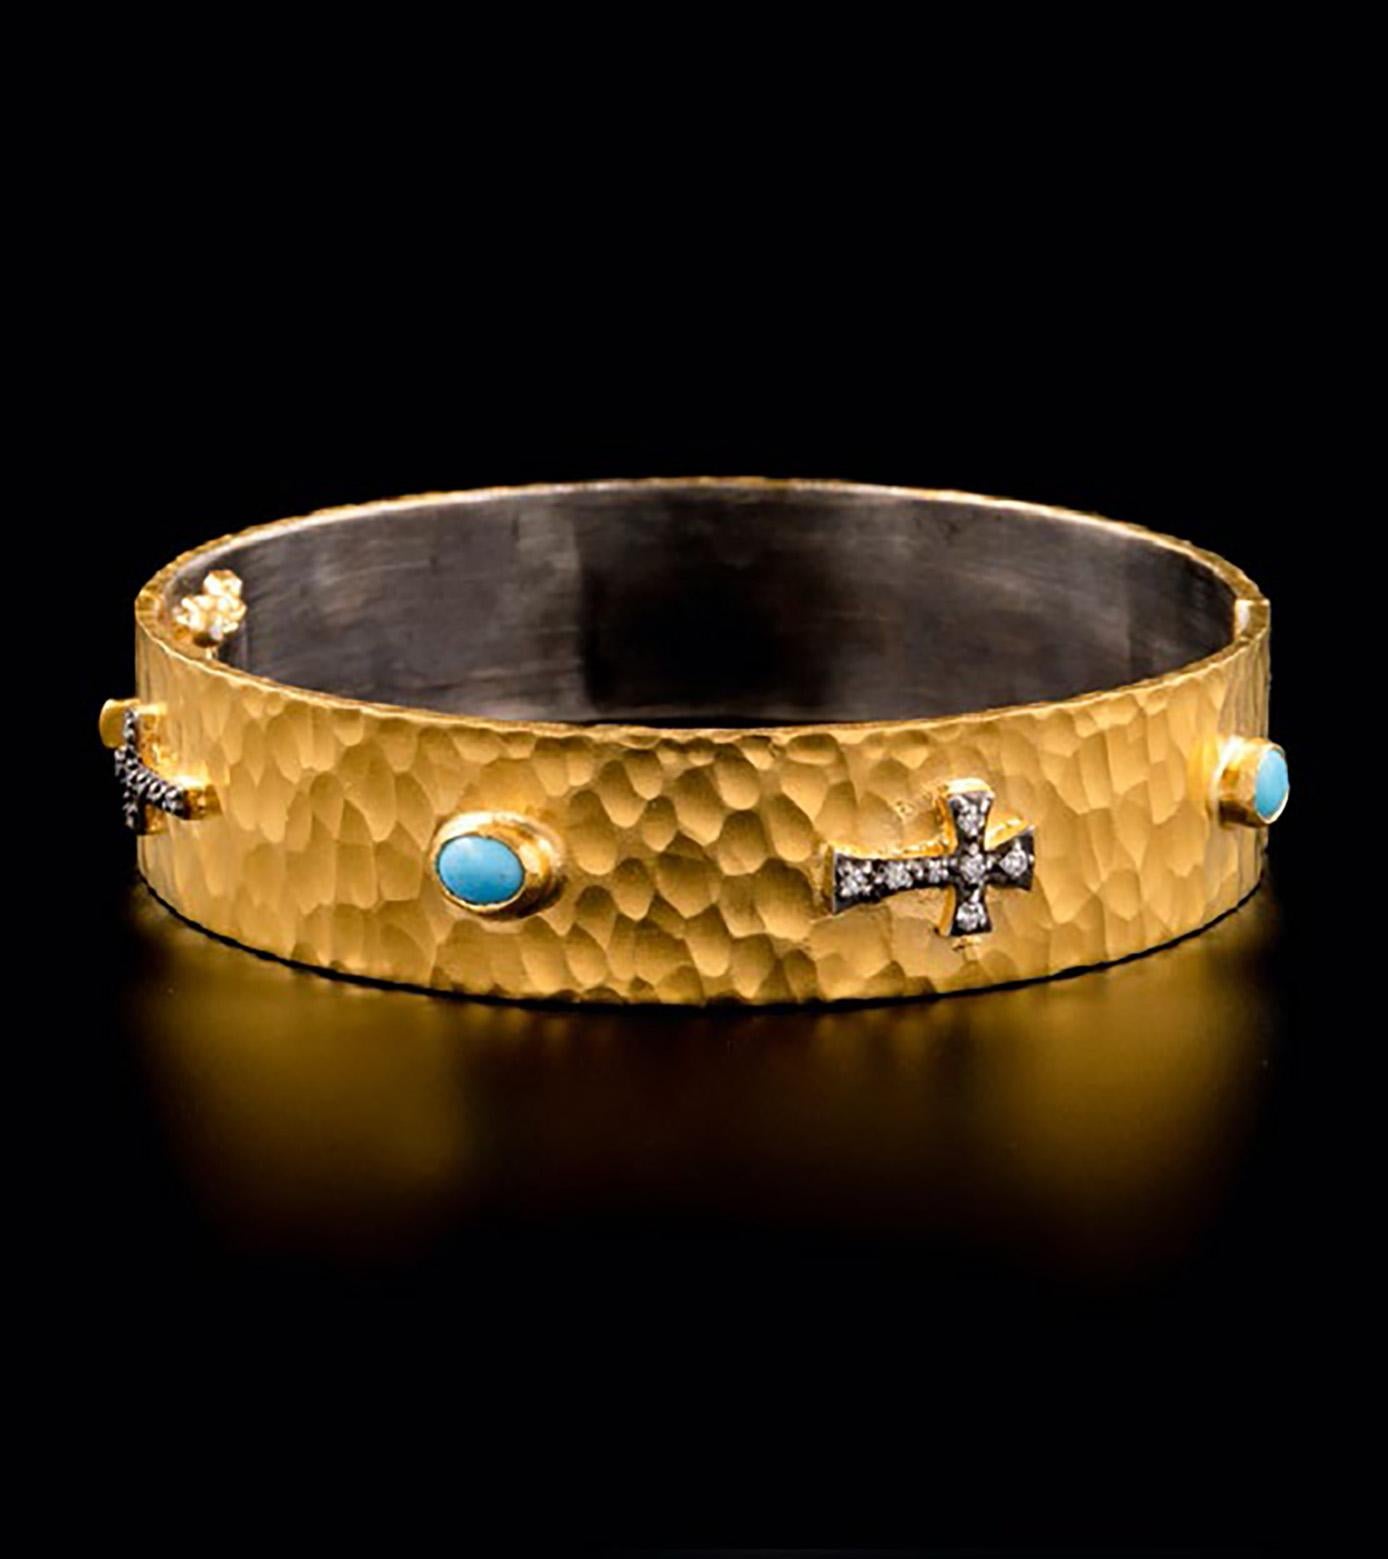 Hinge Bangle Bracelet with Crosses & Turquoise Diamonds & 24K Gold by Kurtulan In New Condition For Sale In Bozeman, MT